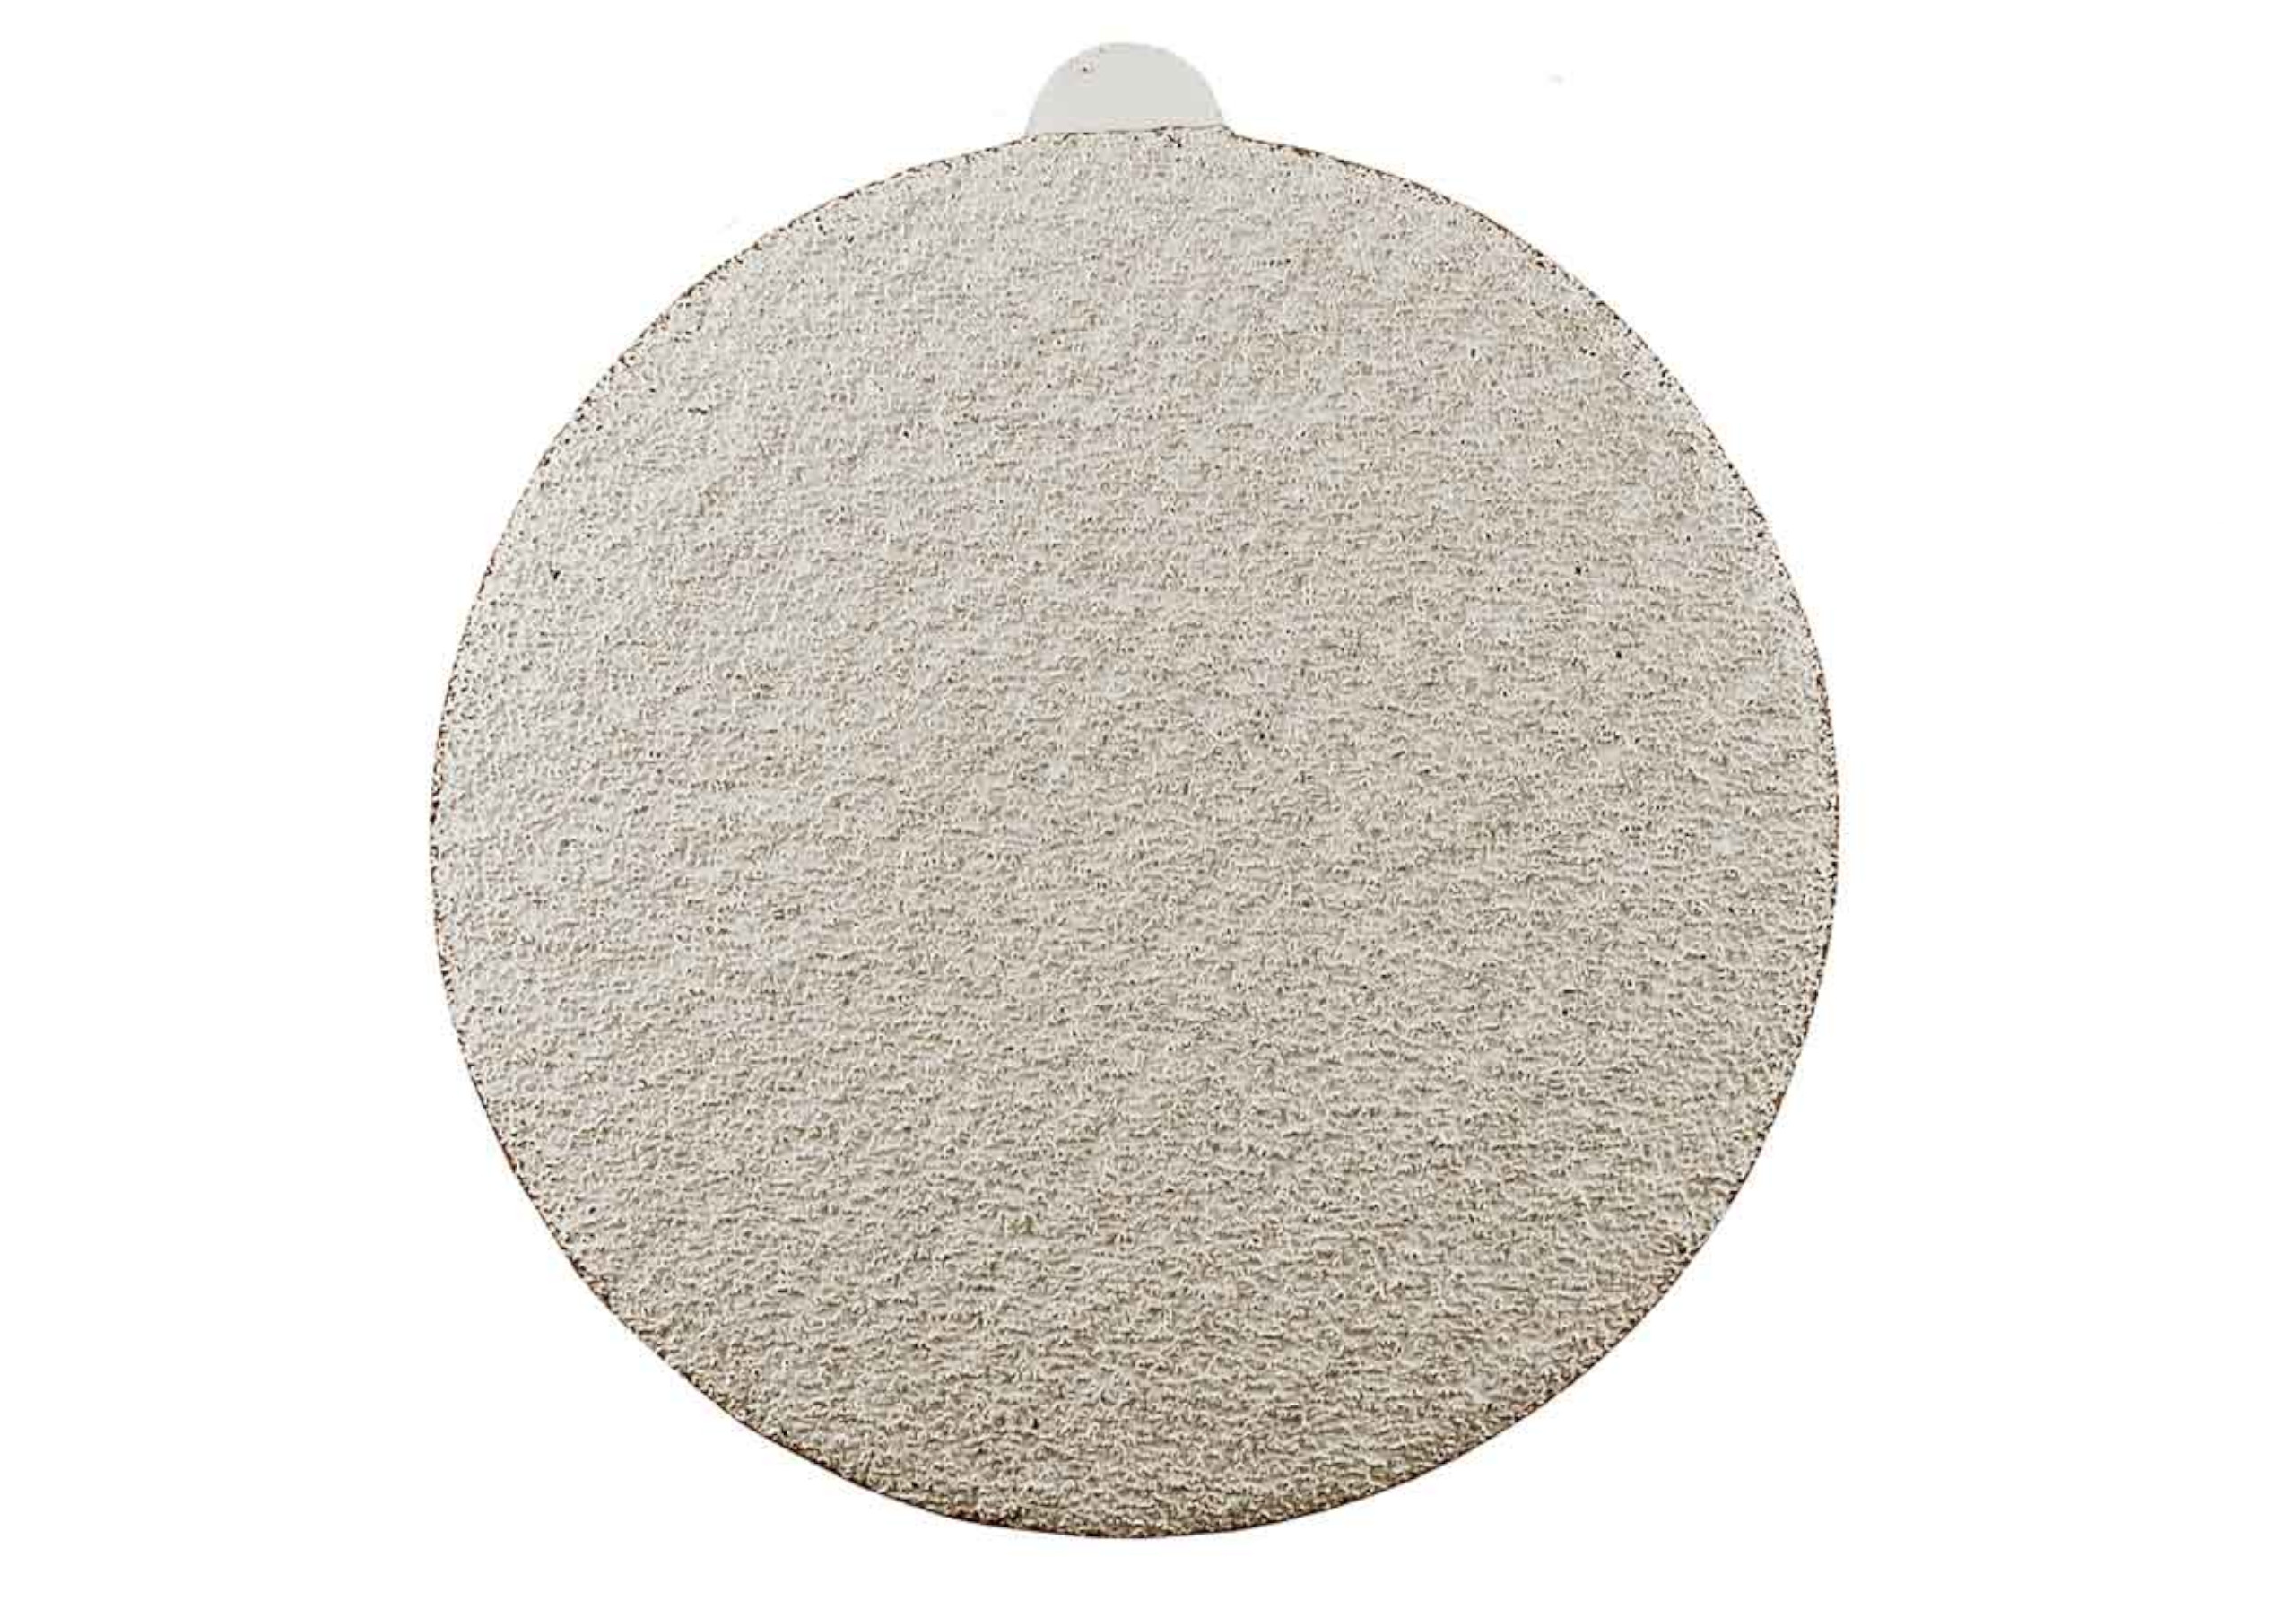 This is an image of our PSA Sanding Discs